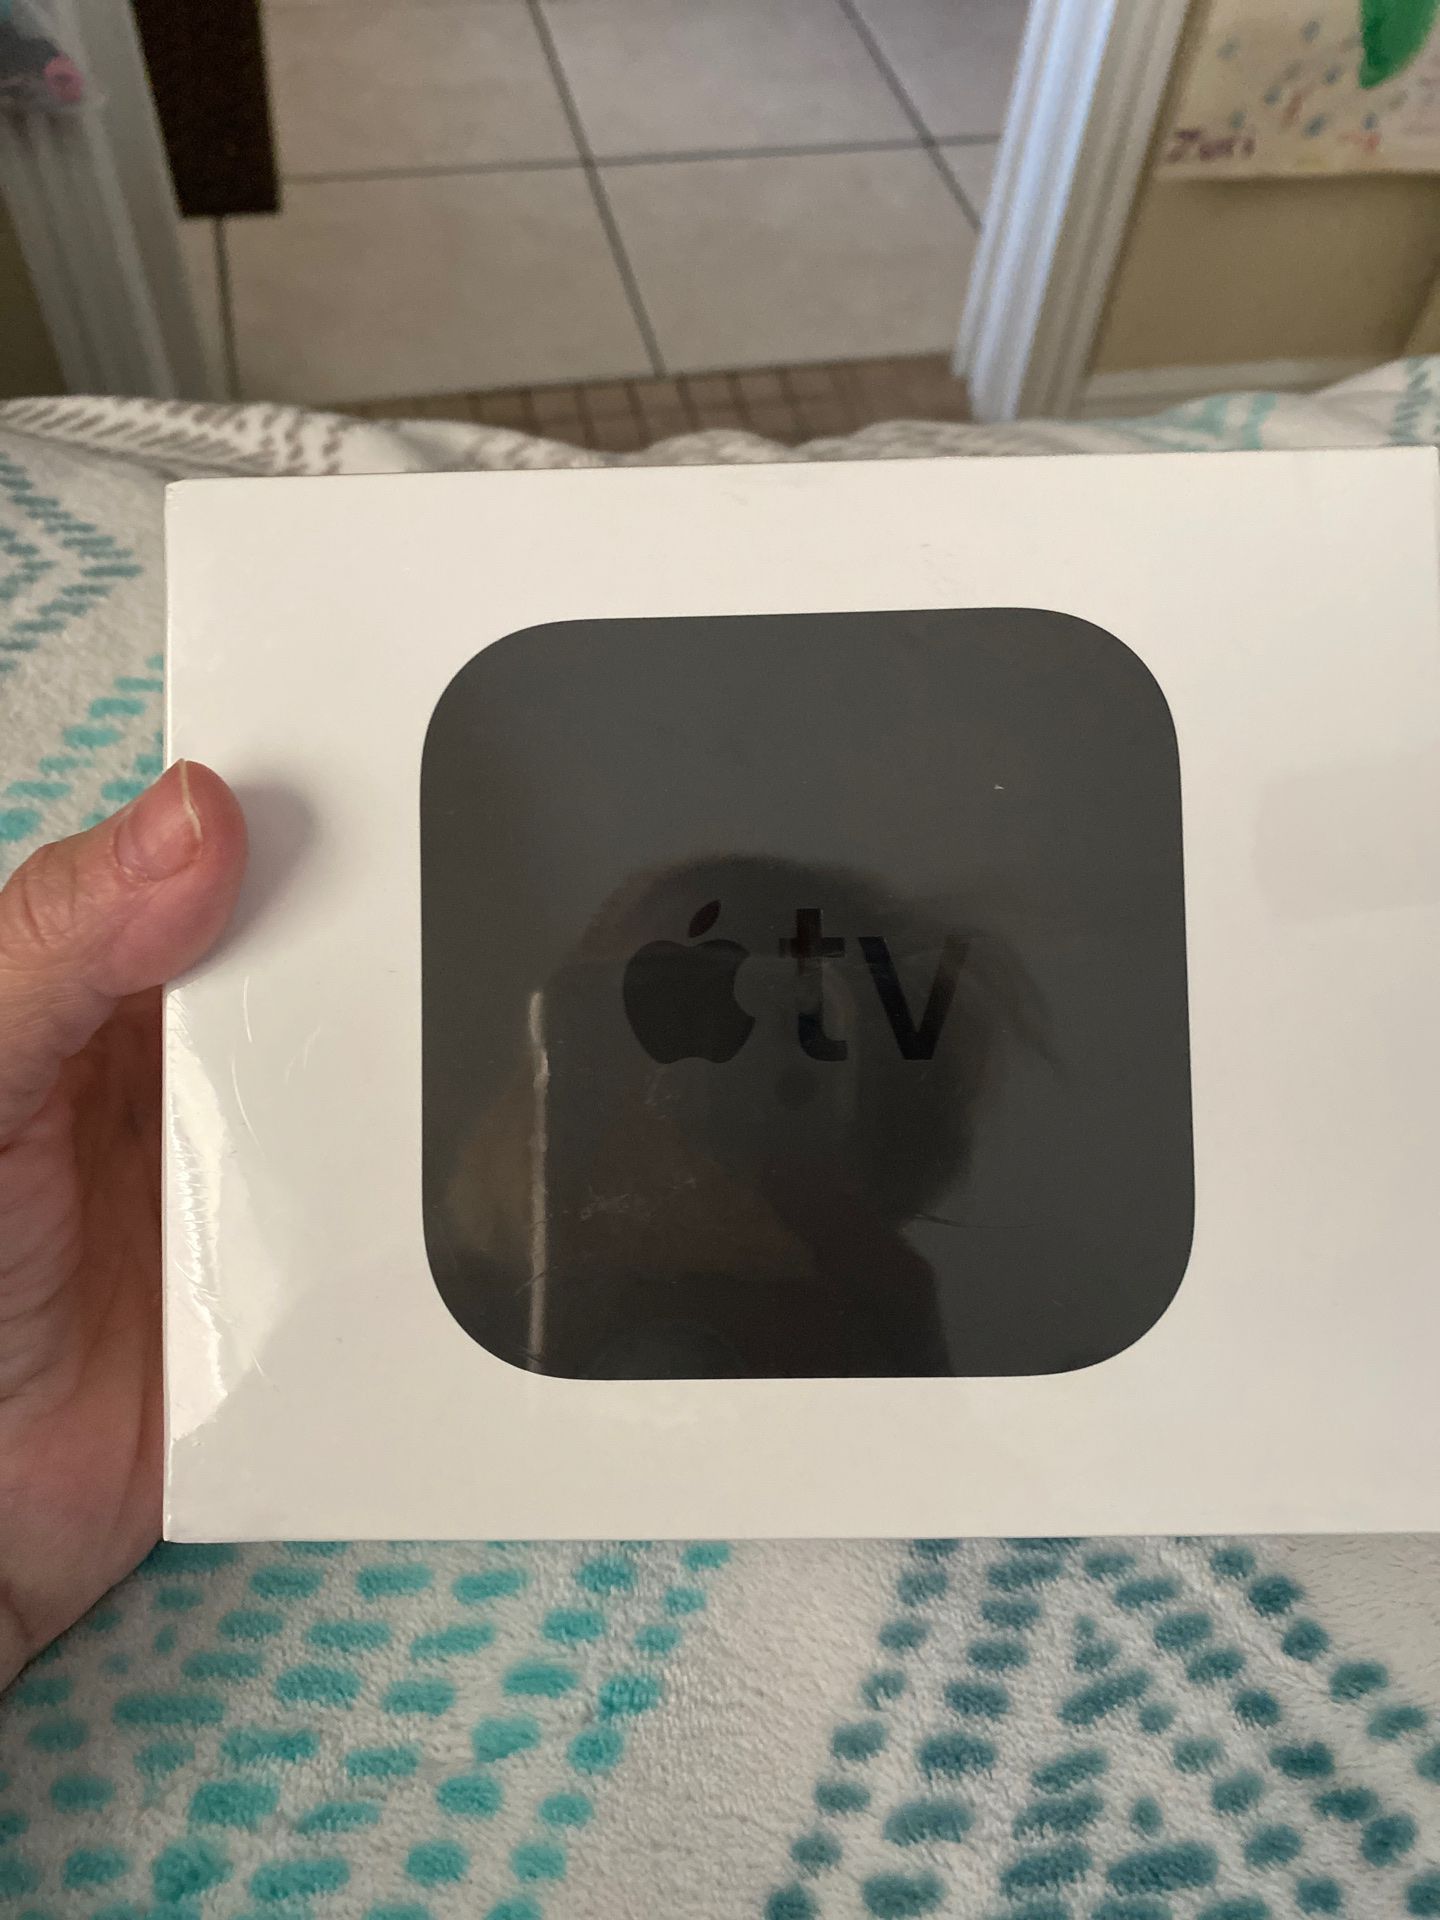 Apple TV 4K brand new in shrink wrap 32 gigs please ask any questions